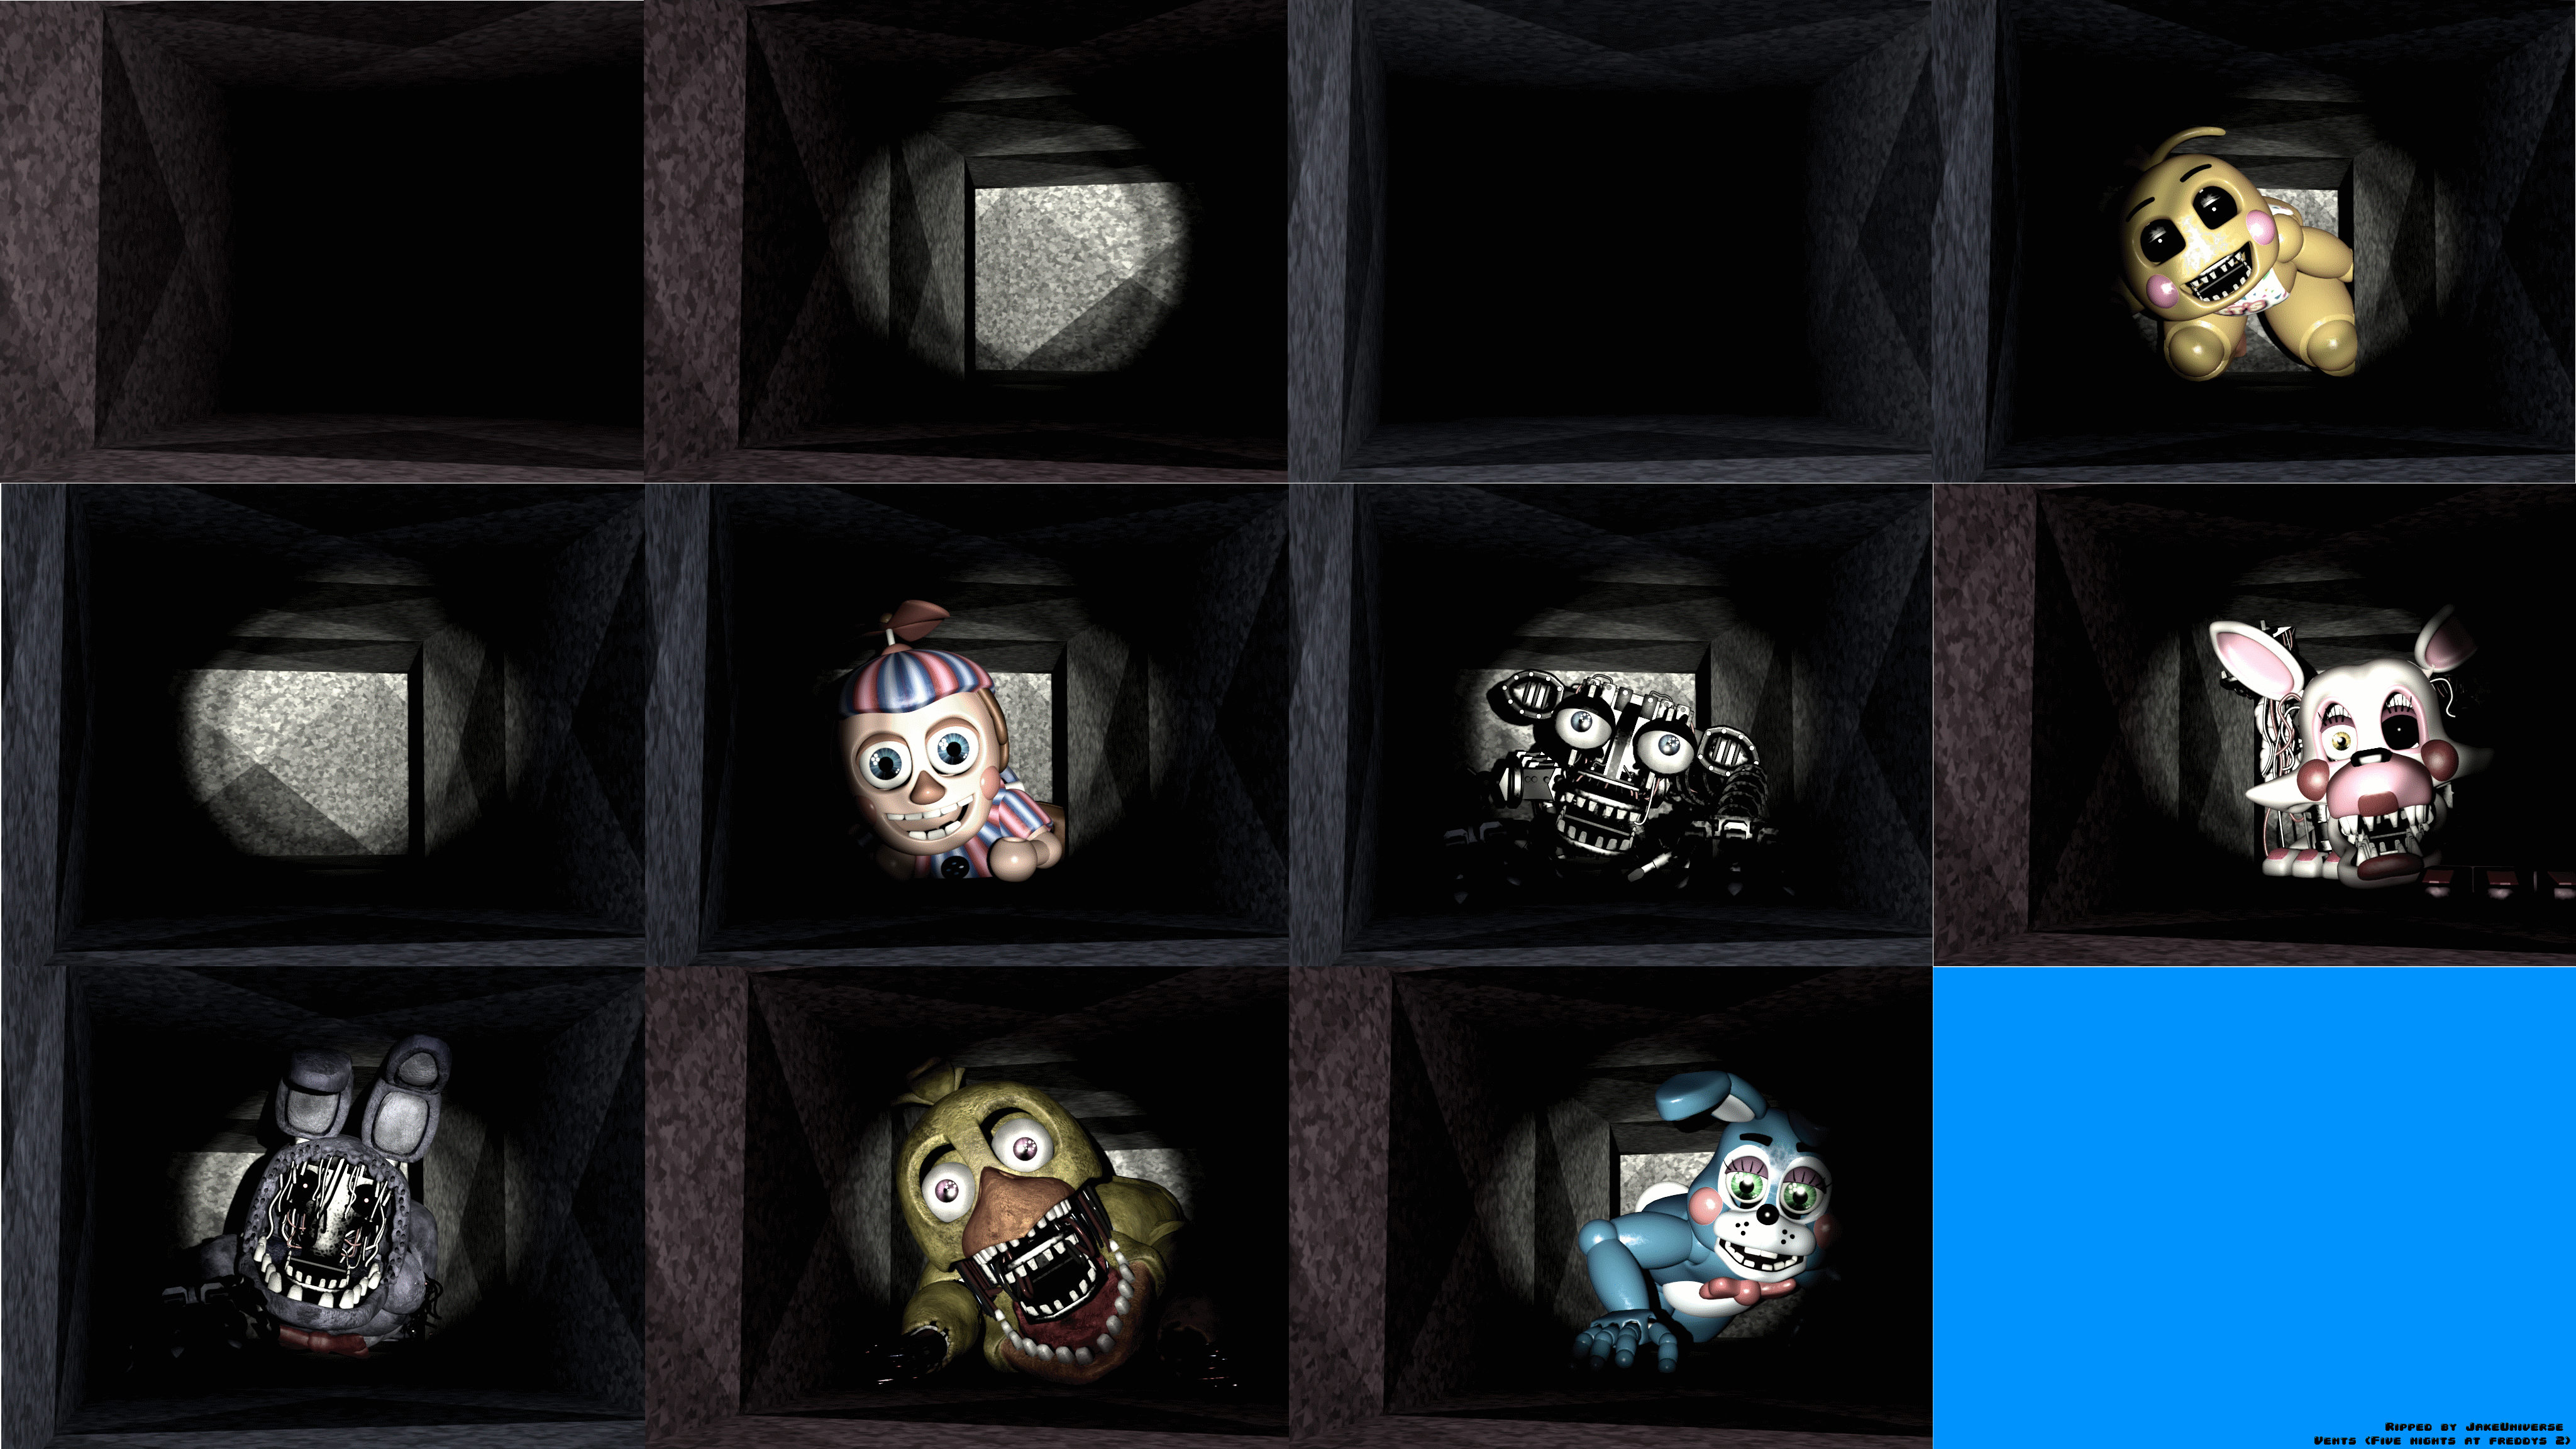 PC / Computer - Five Nights at Freddy's - Doors - The Spriters Resource